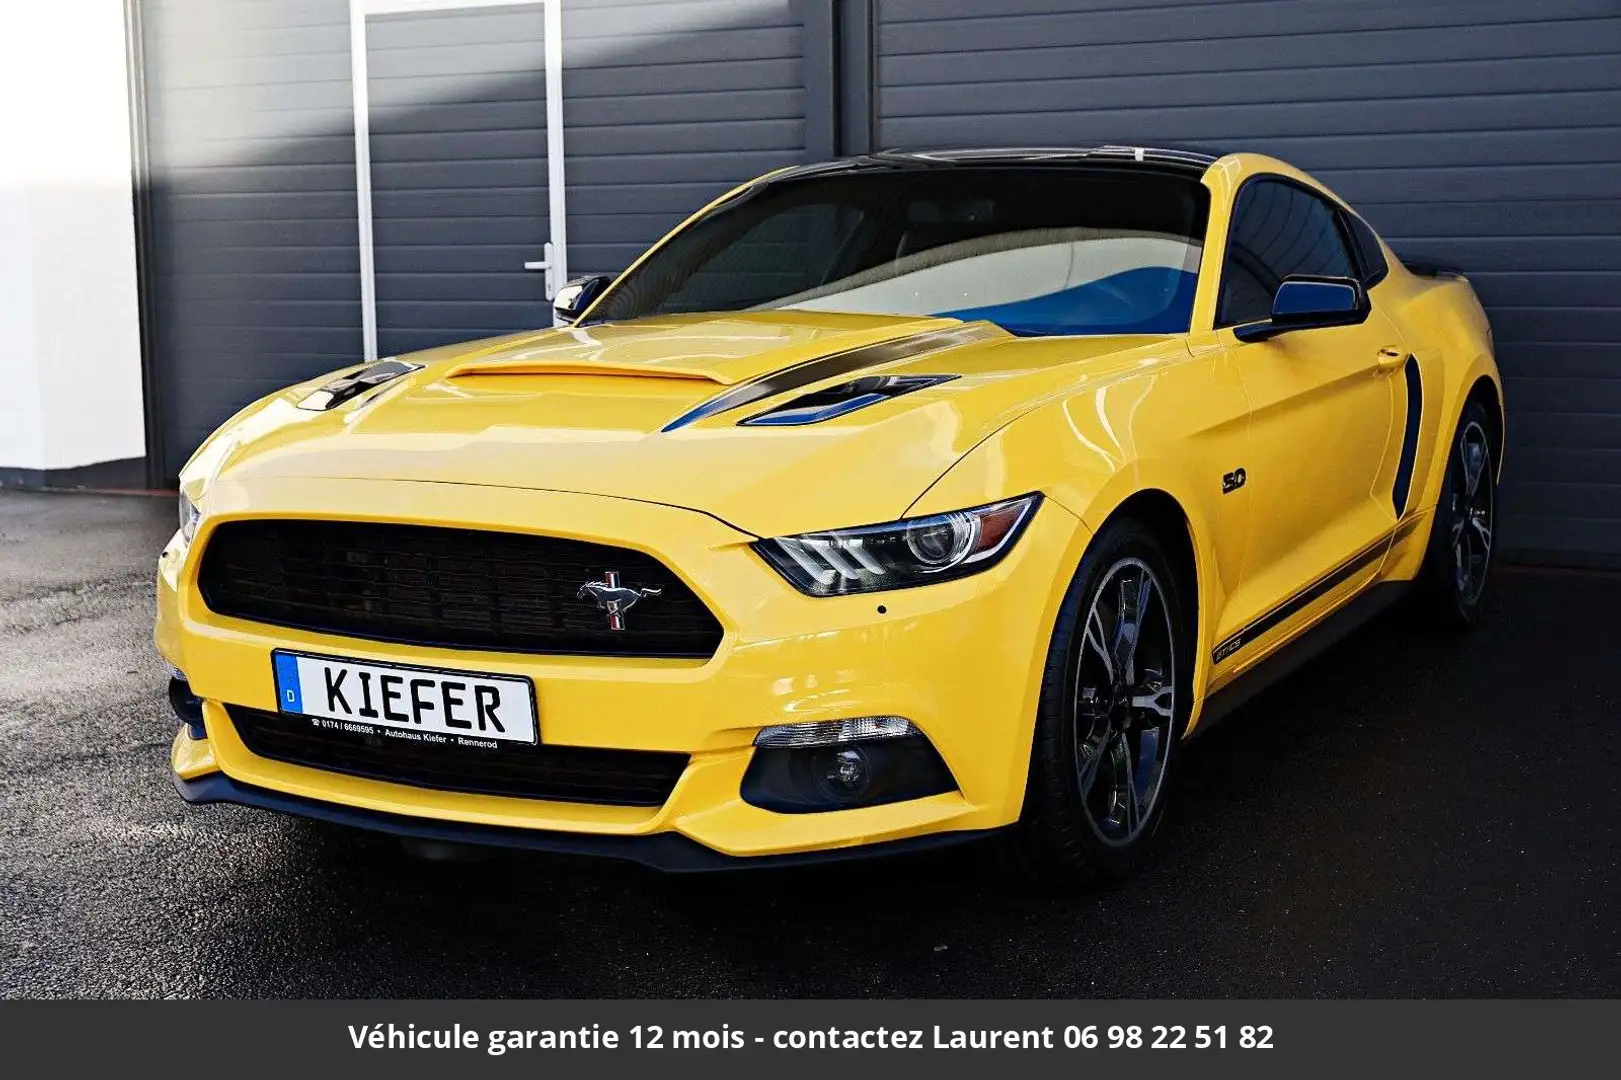 Ford Mustang 5.0 GT California Special Hors homologation 4500e Yellow - 1